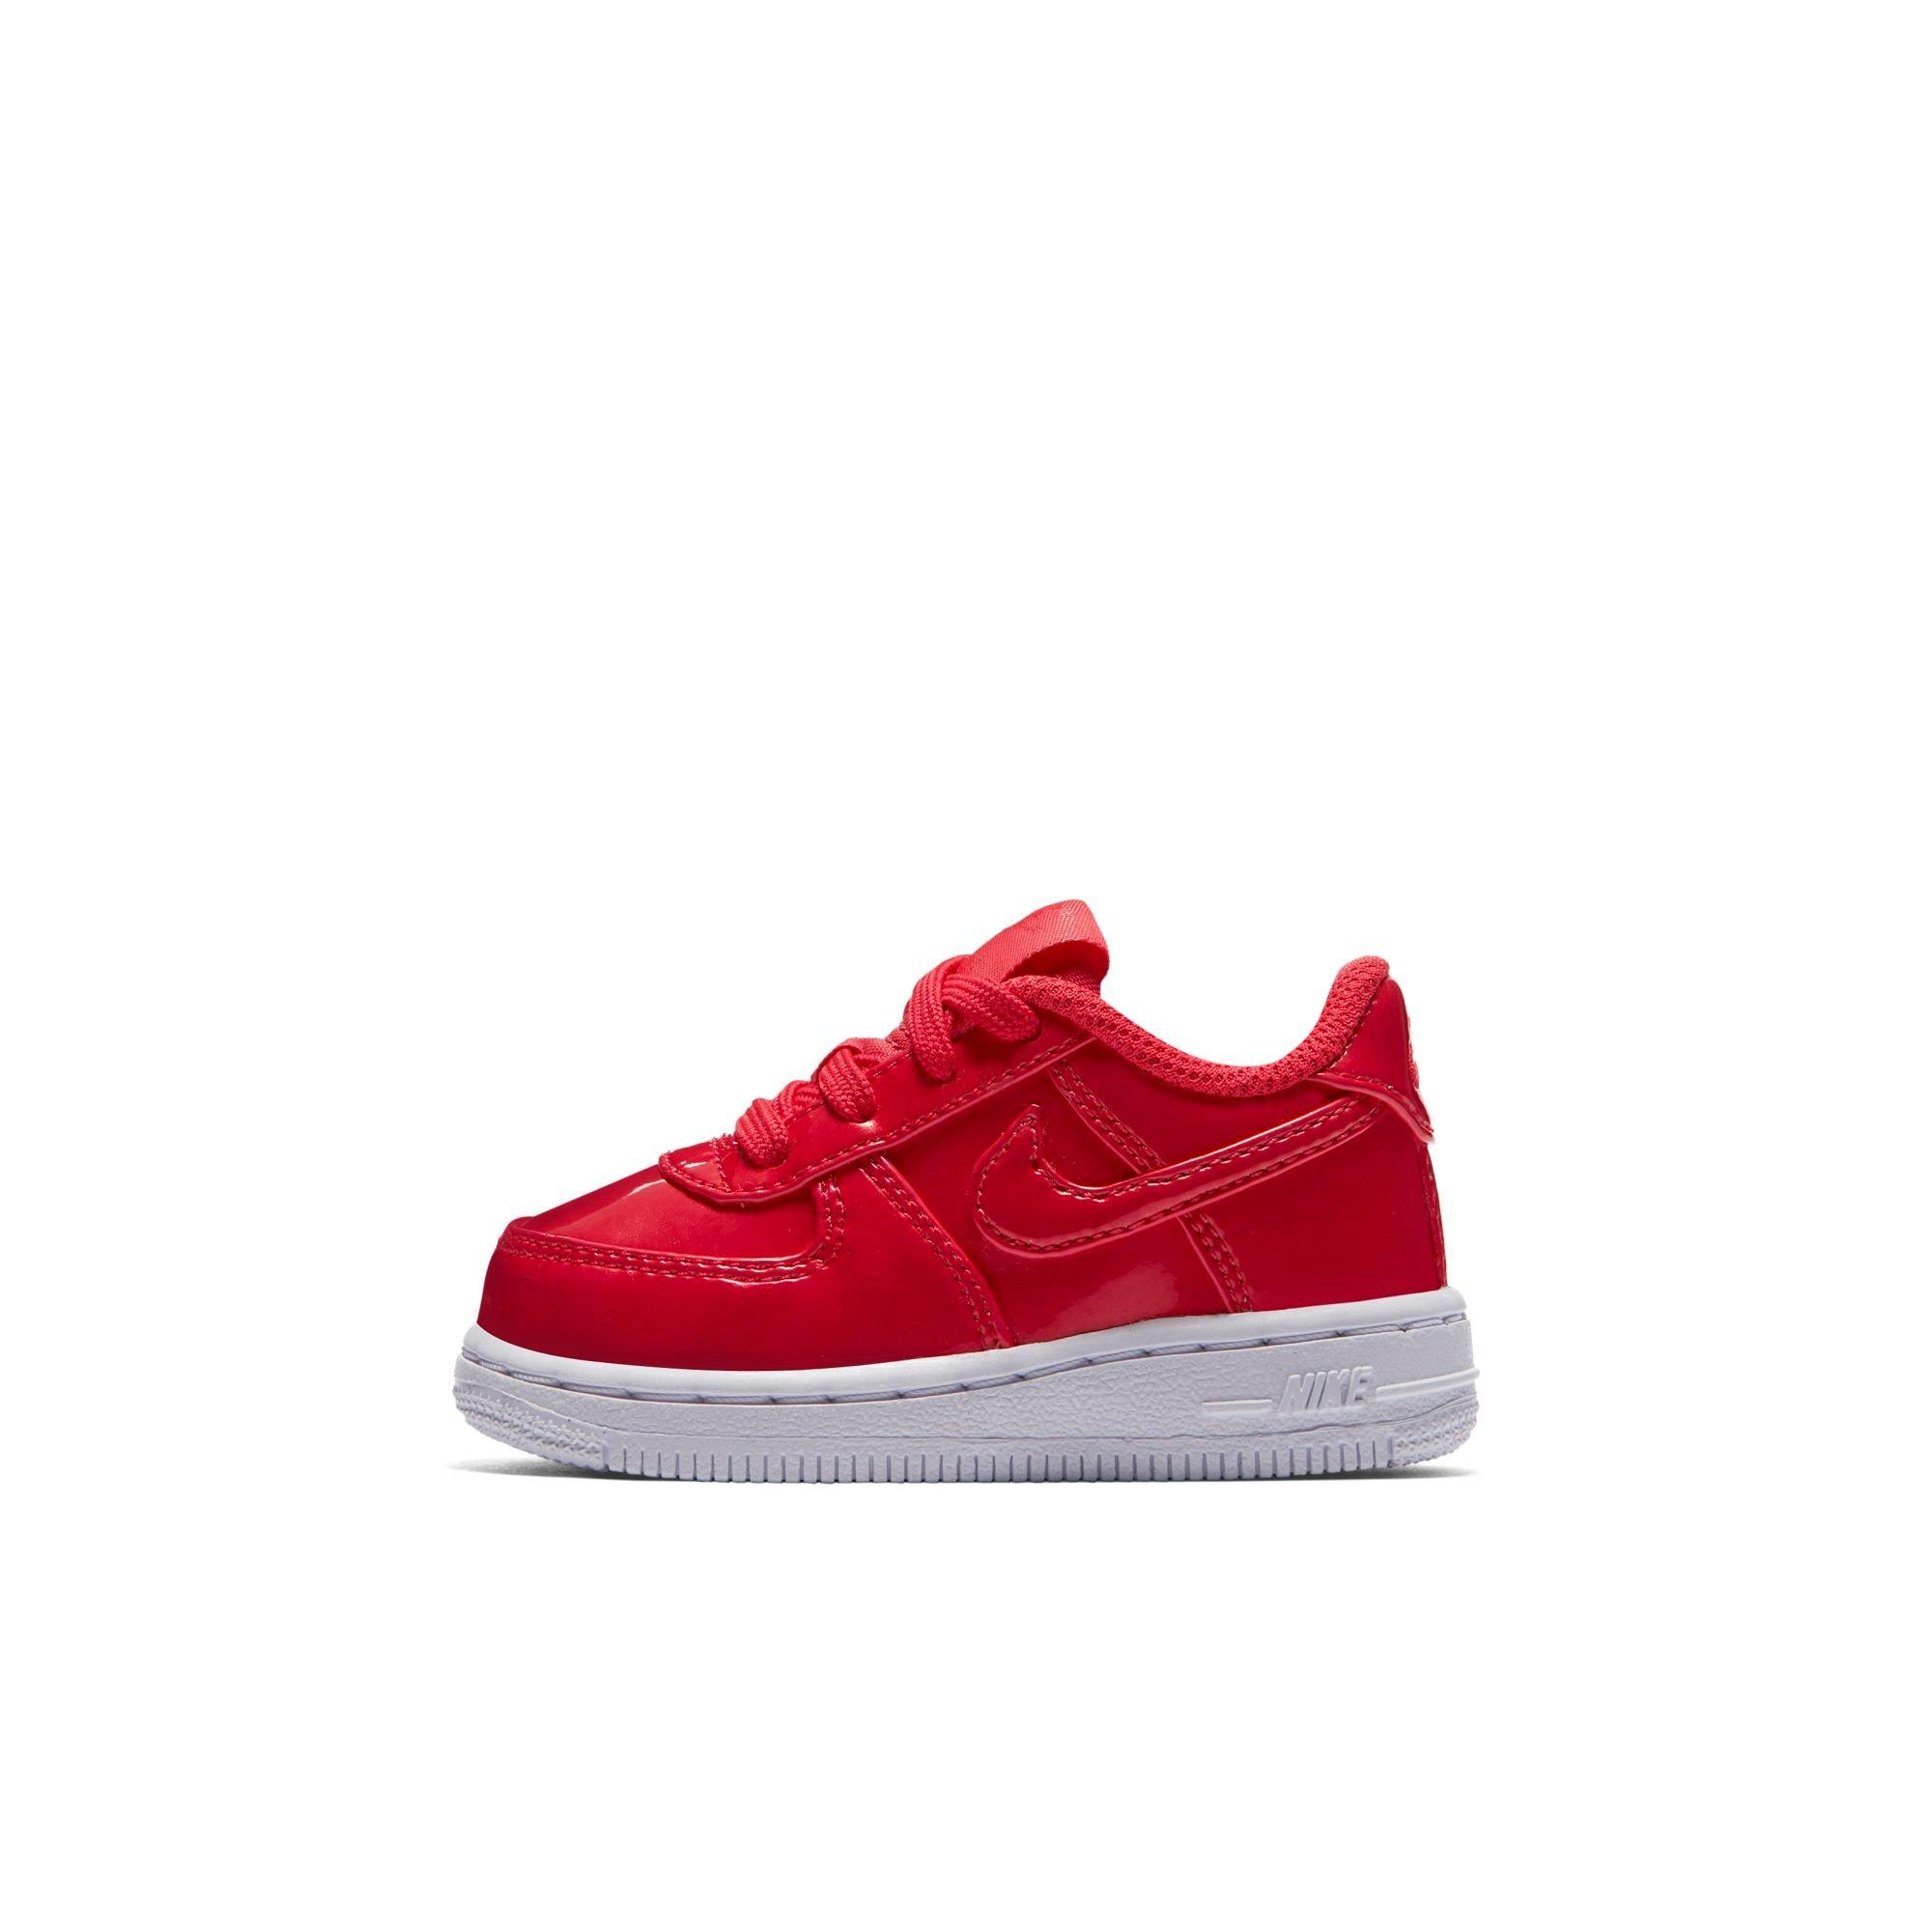 Nike Air Force 1 '07 LV8 UV Siren Red 2018 for Sale